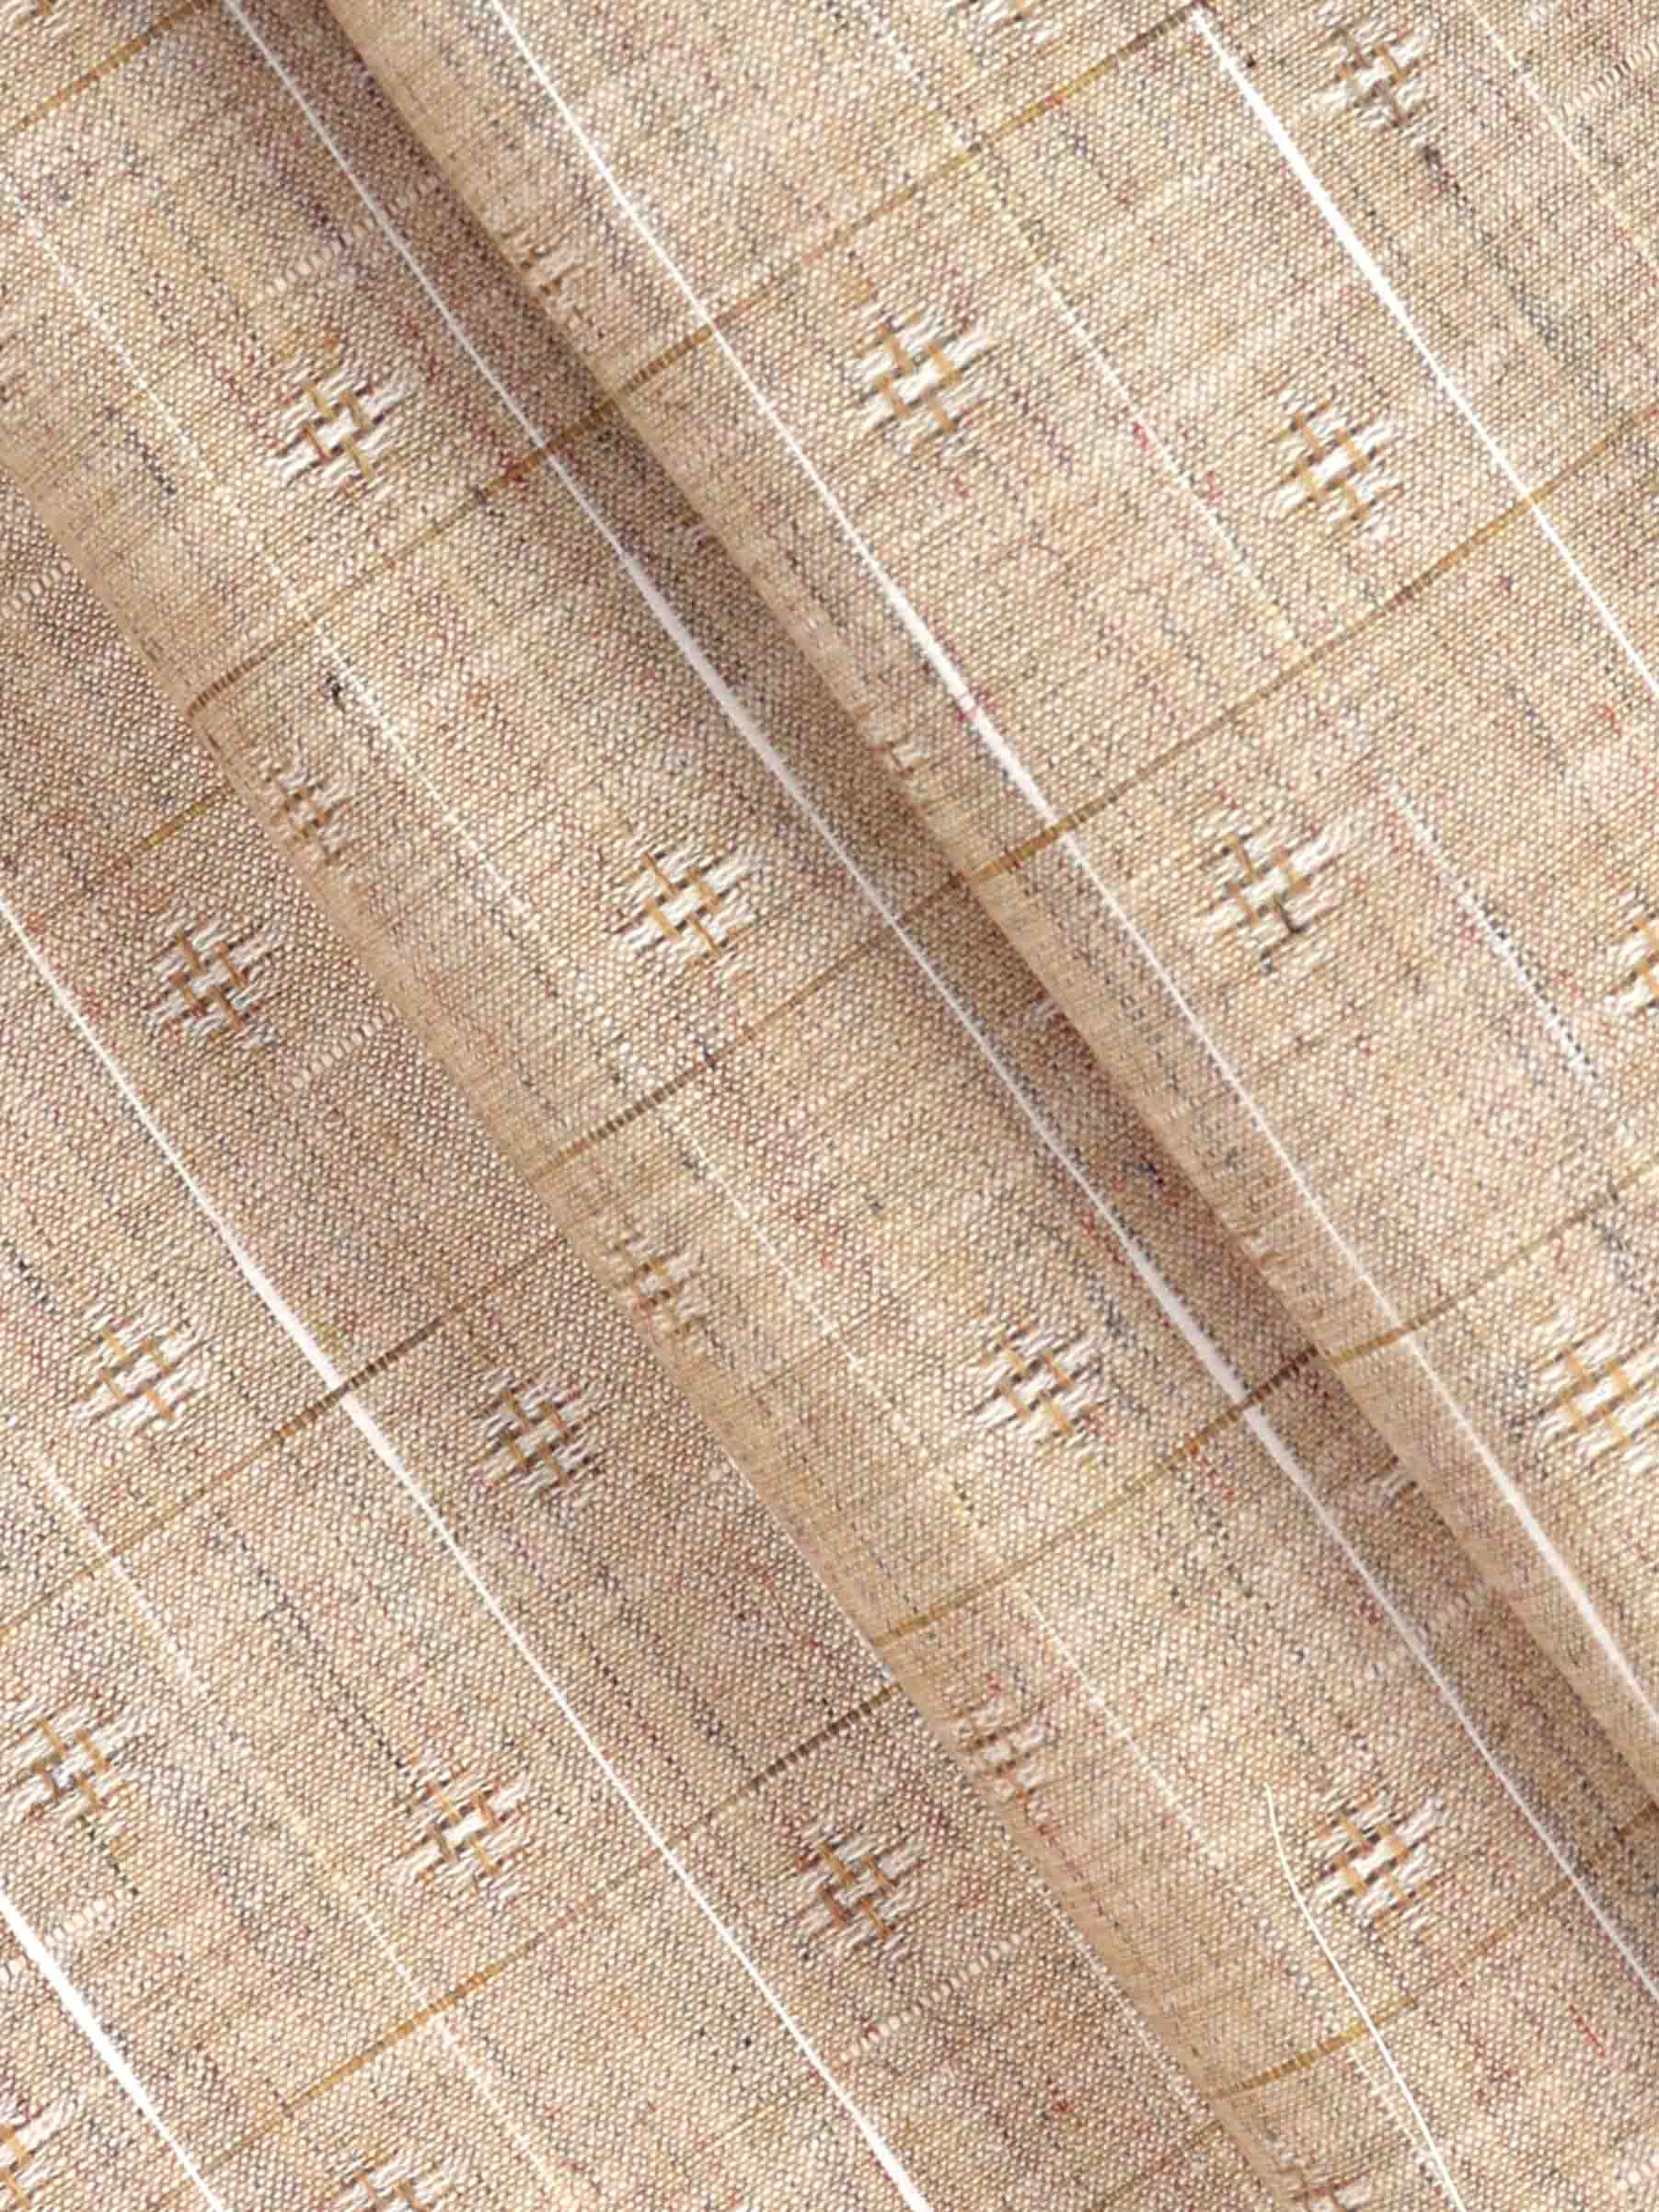 Cotton Colour Brown Checked Shirt Fabric High Style-PAttern view